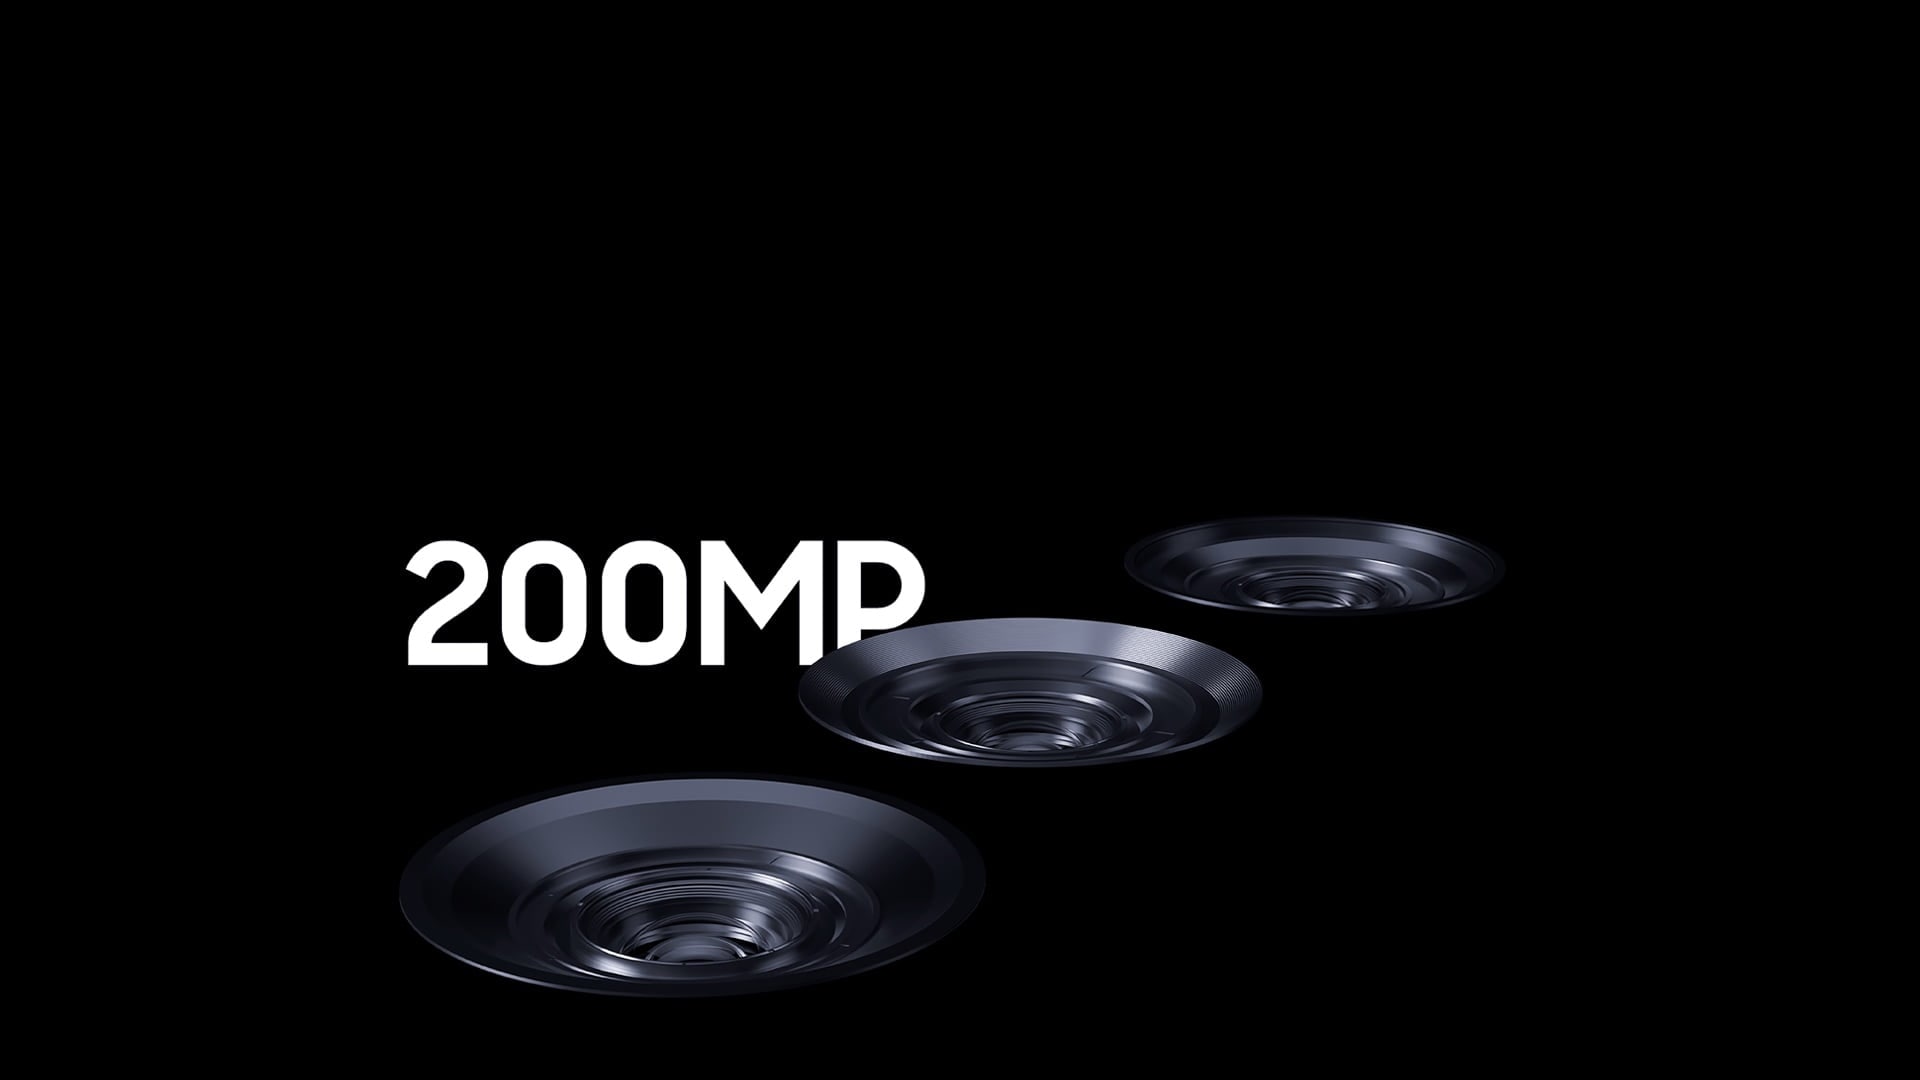 a black background with three camera lenses and the text '200MP' in the middle of it